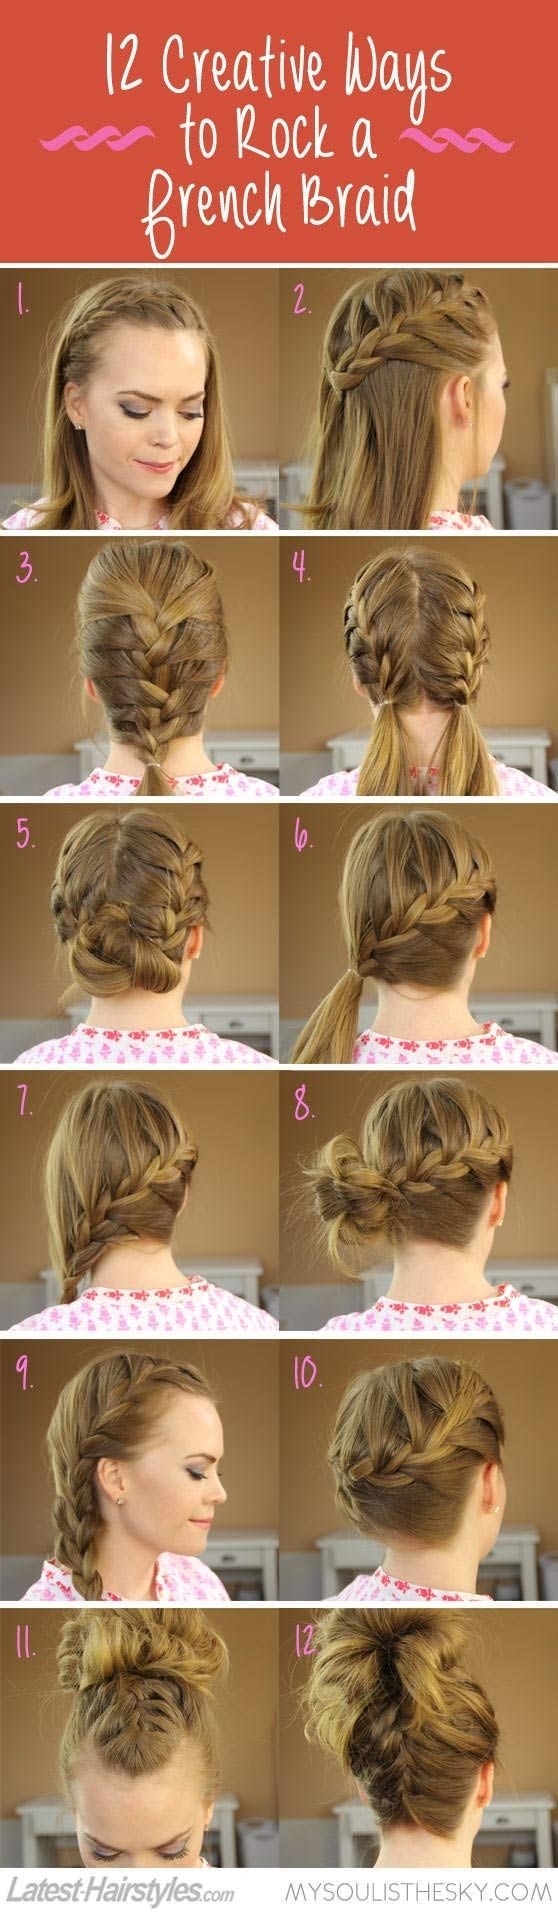 Creative French Braided Hairstyles Ideas